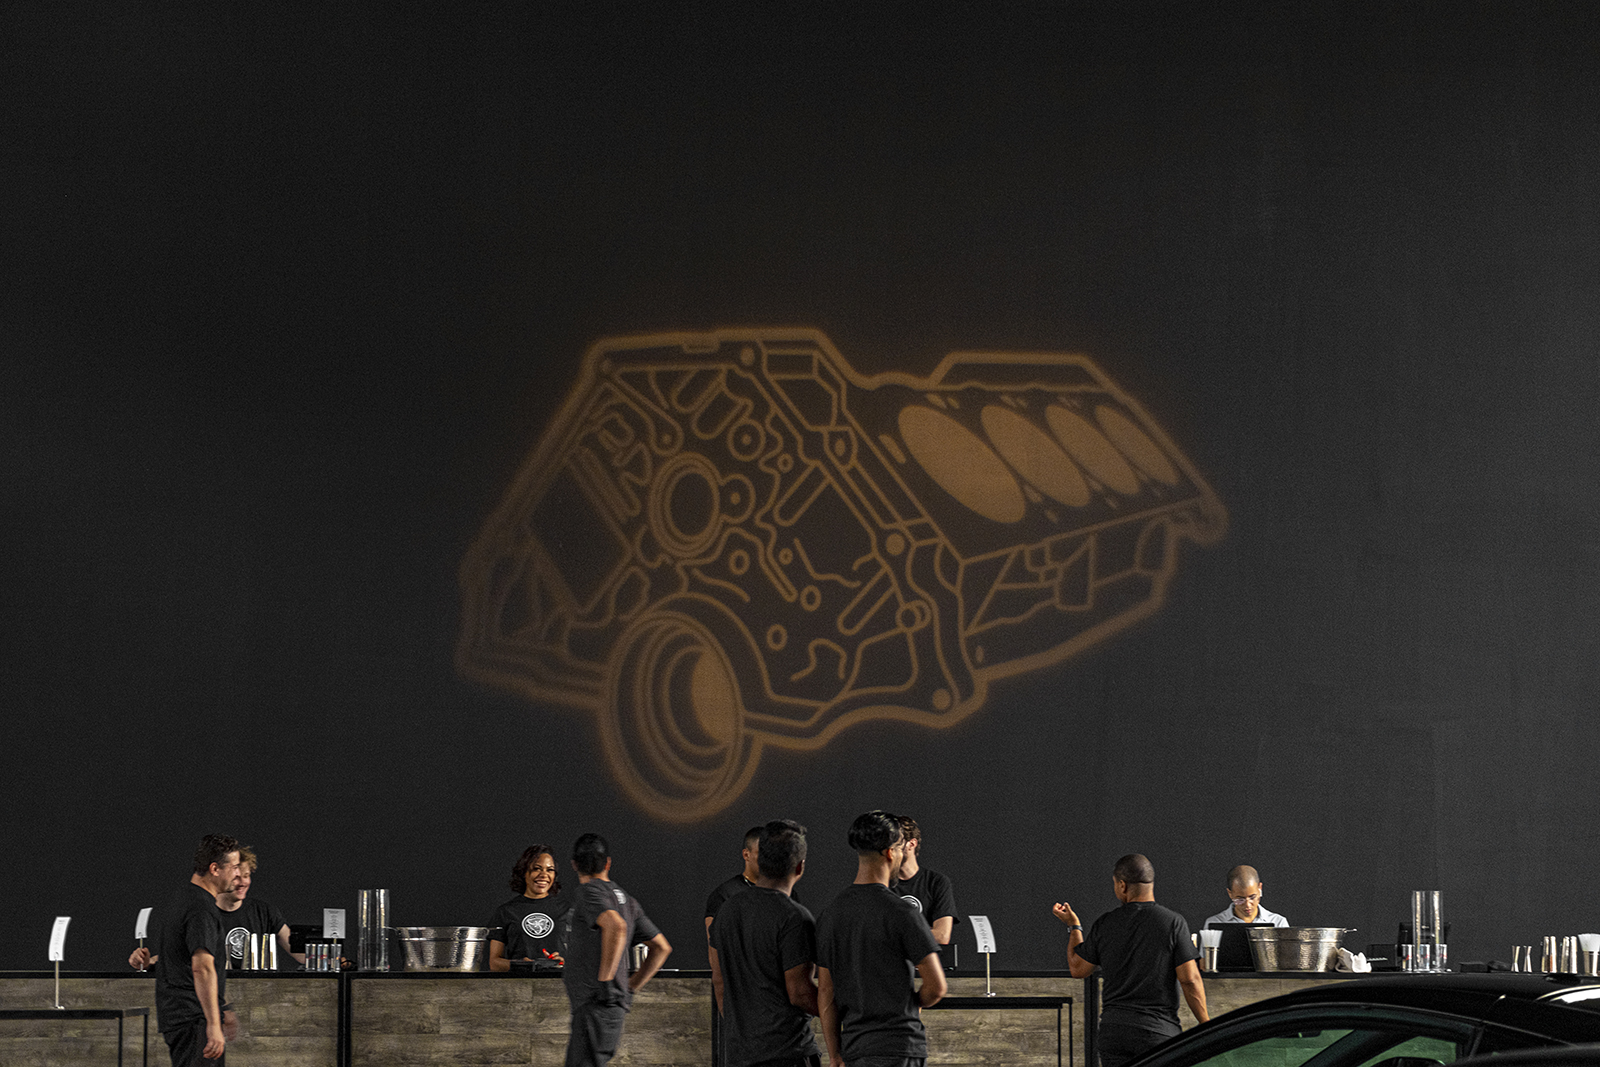 A projection on the wall of the gold engine.